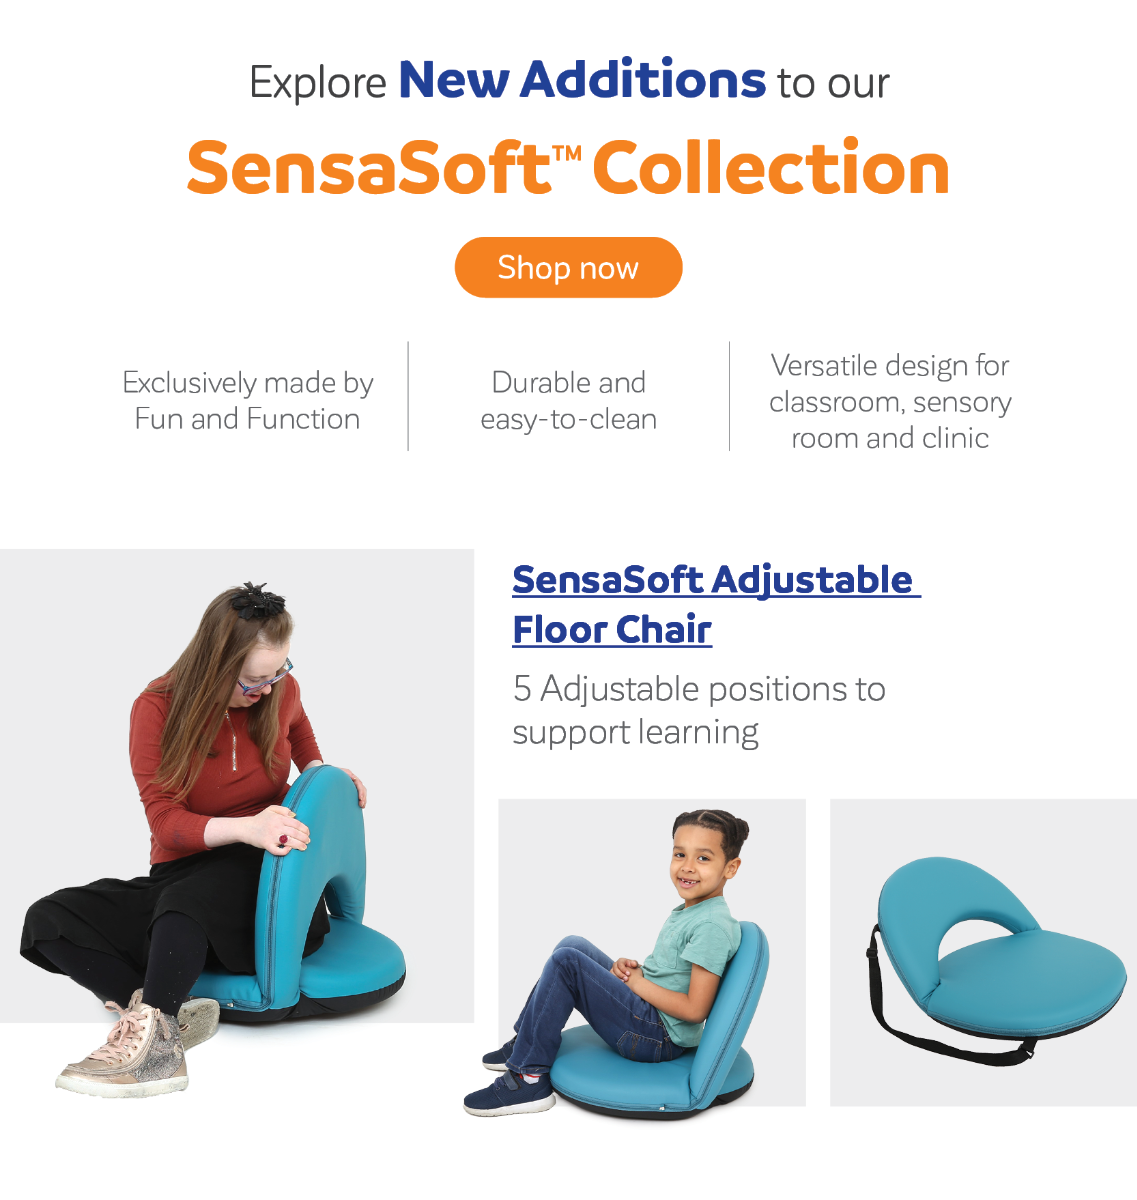 Explore New Additions to our Sensasoft Collection. Sensasoft Adjustable Floor Chair